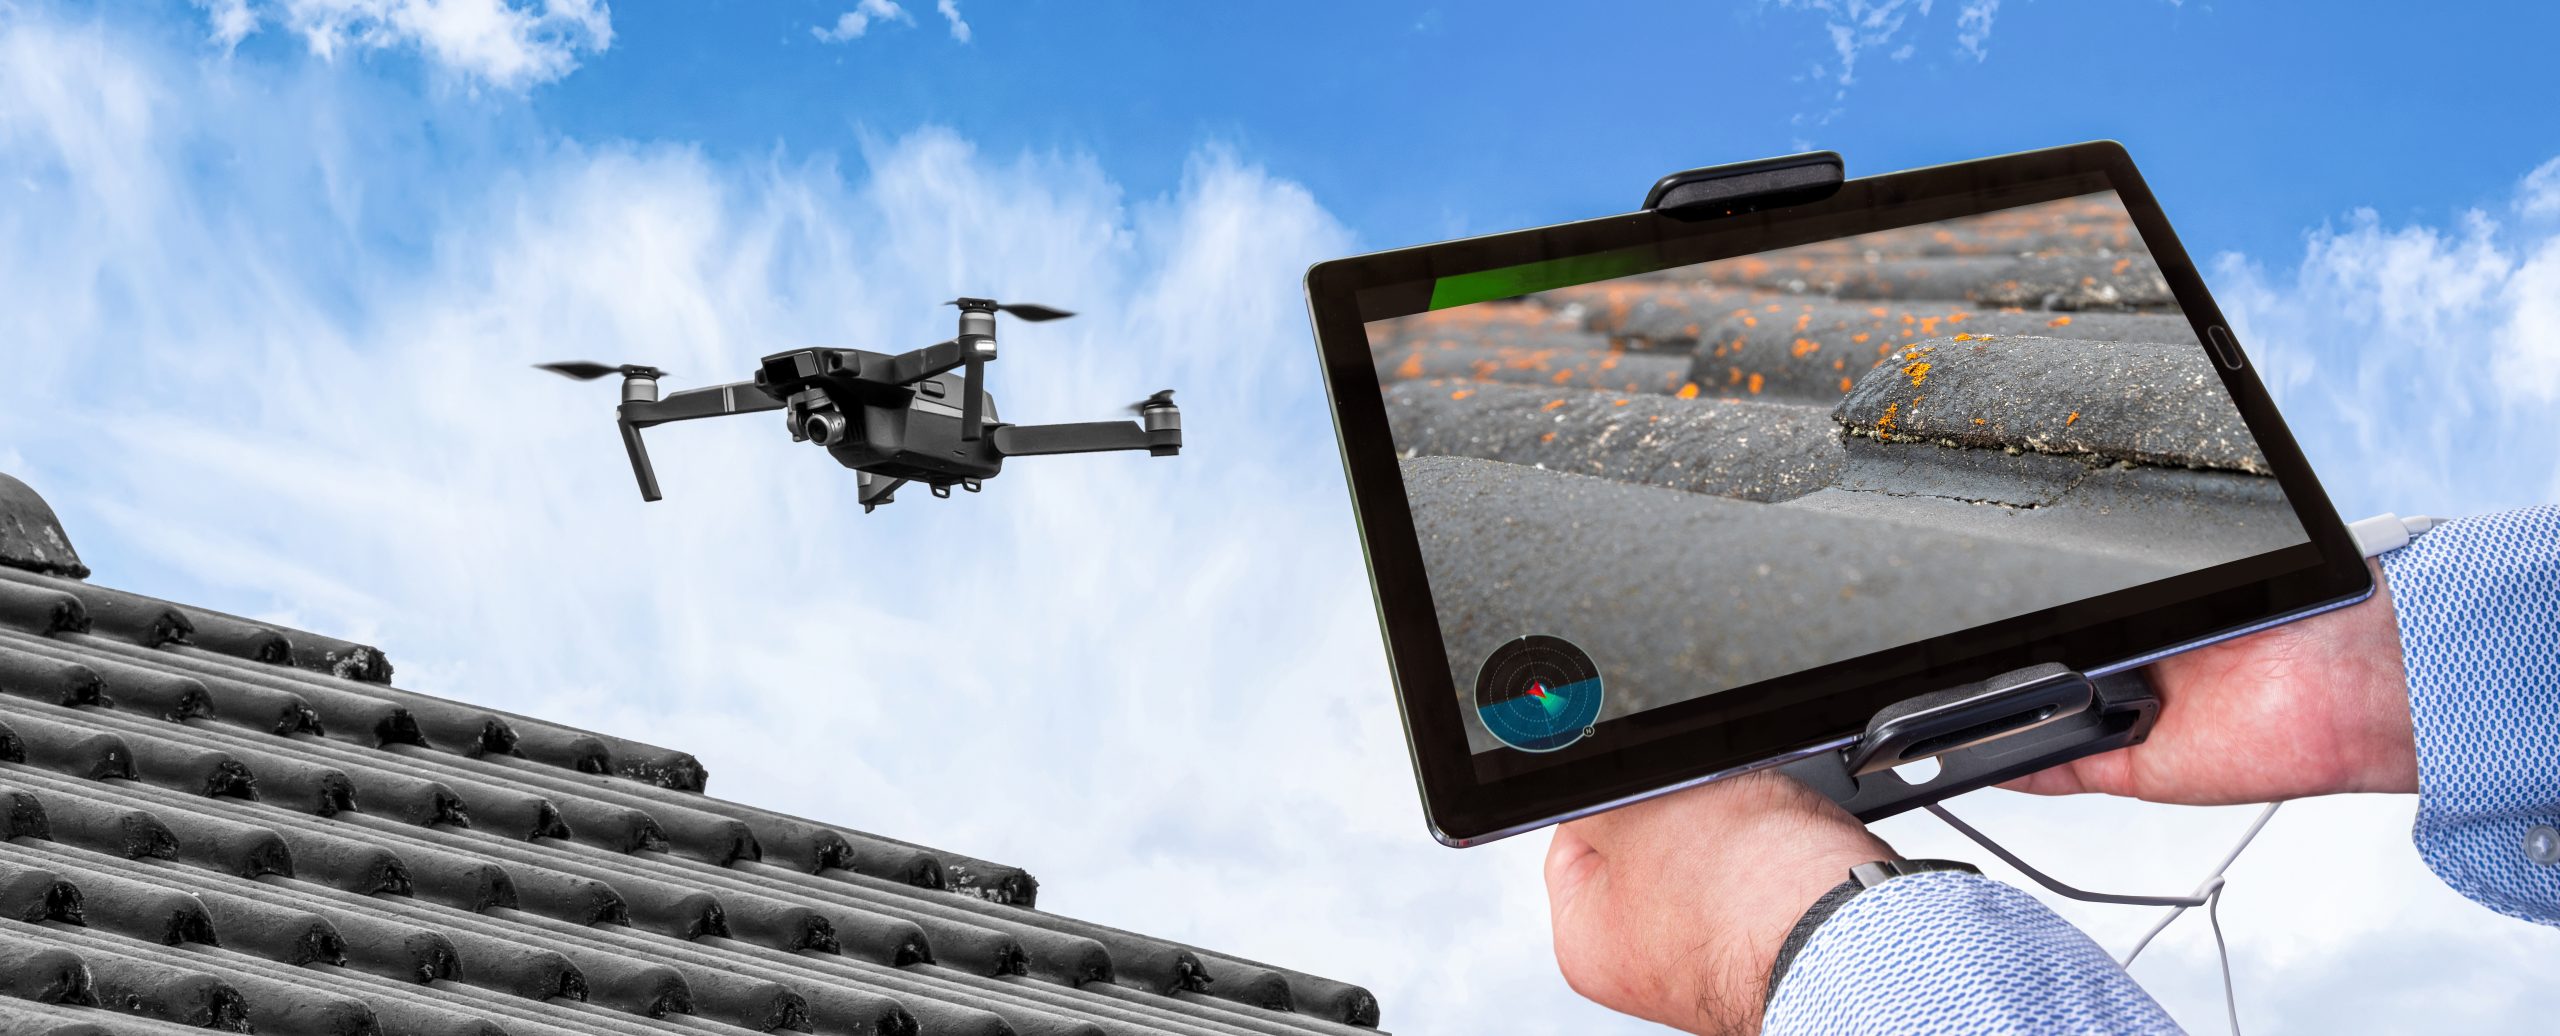 Drone being used with an tablet screen facing the screen